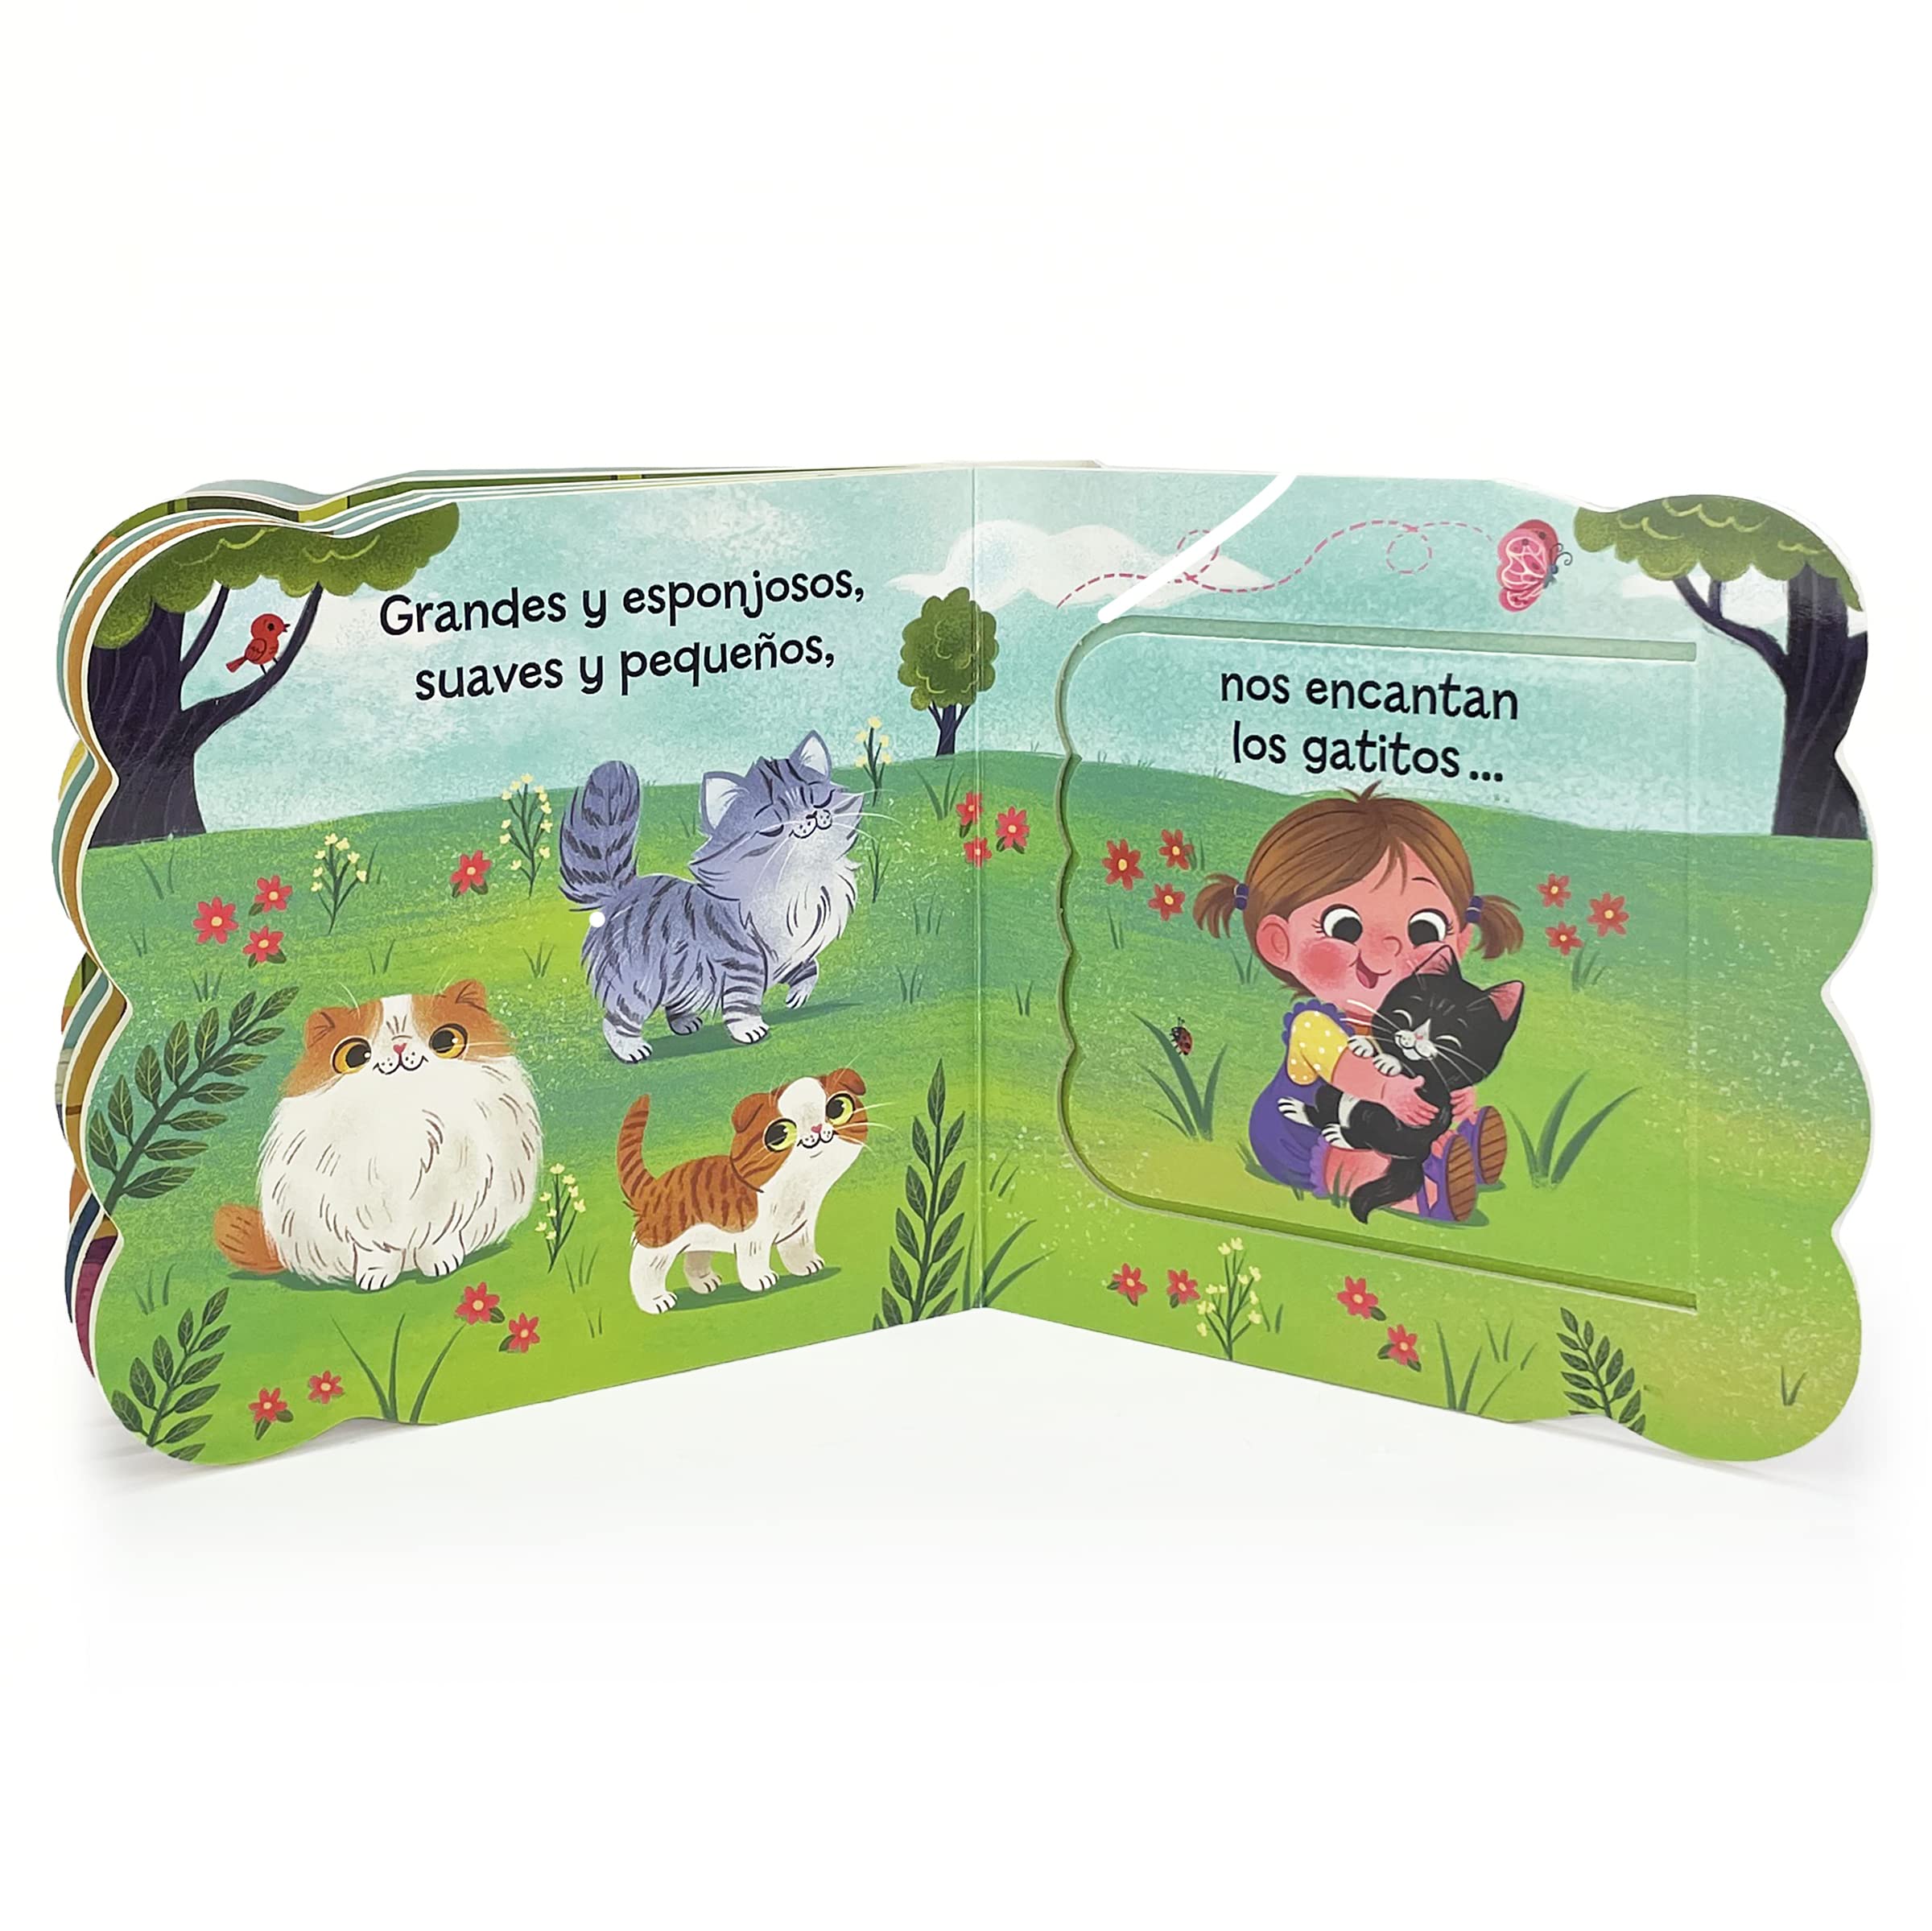 Babies Love Gatitos / Kittens Spanish Language: A Lift-a-Flap Board Book for Babies and Toddlers (en español) (Spanish Edition)